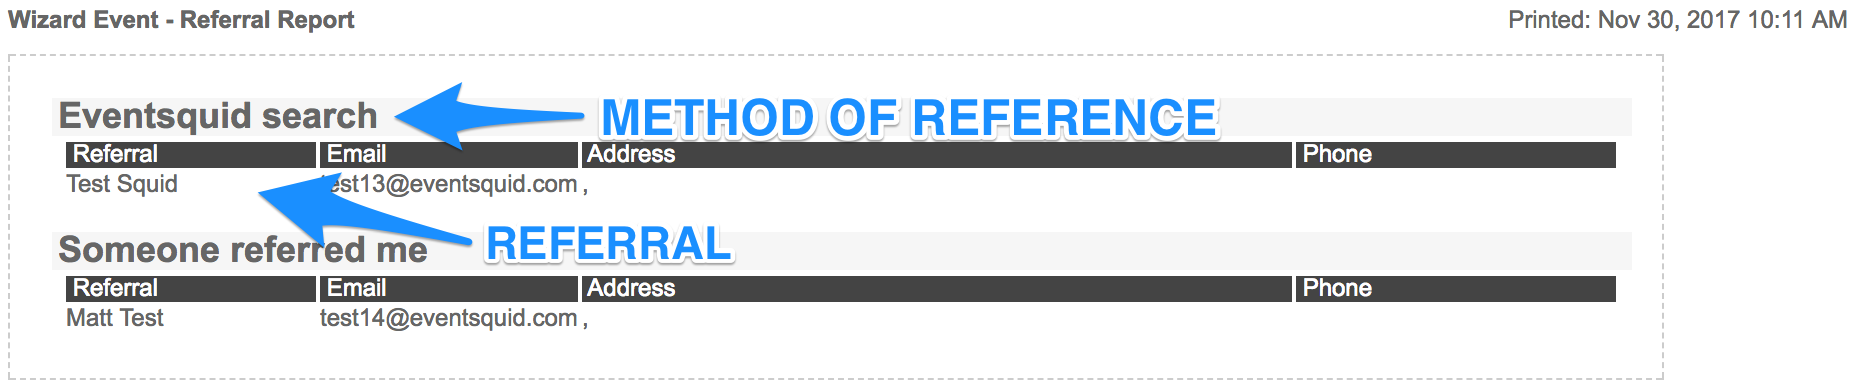 Referral_Report.png